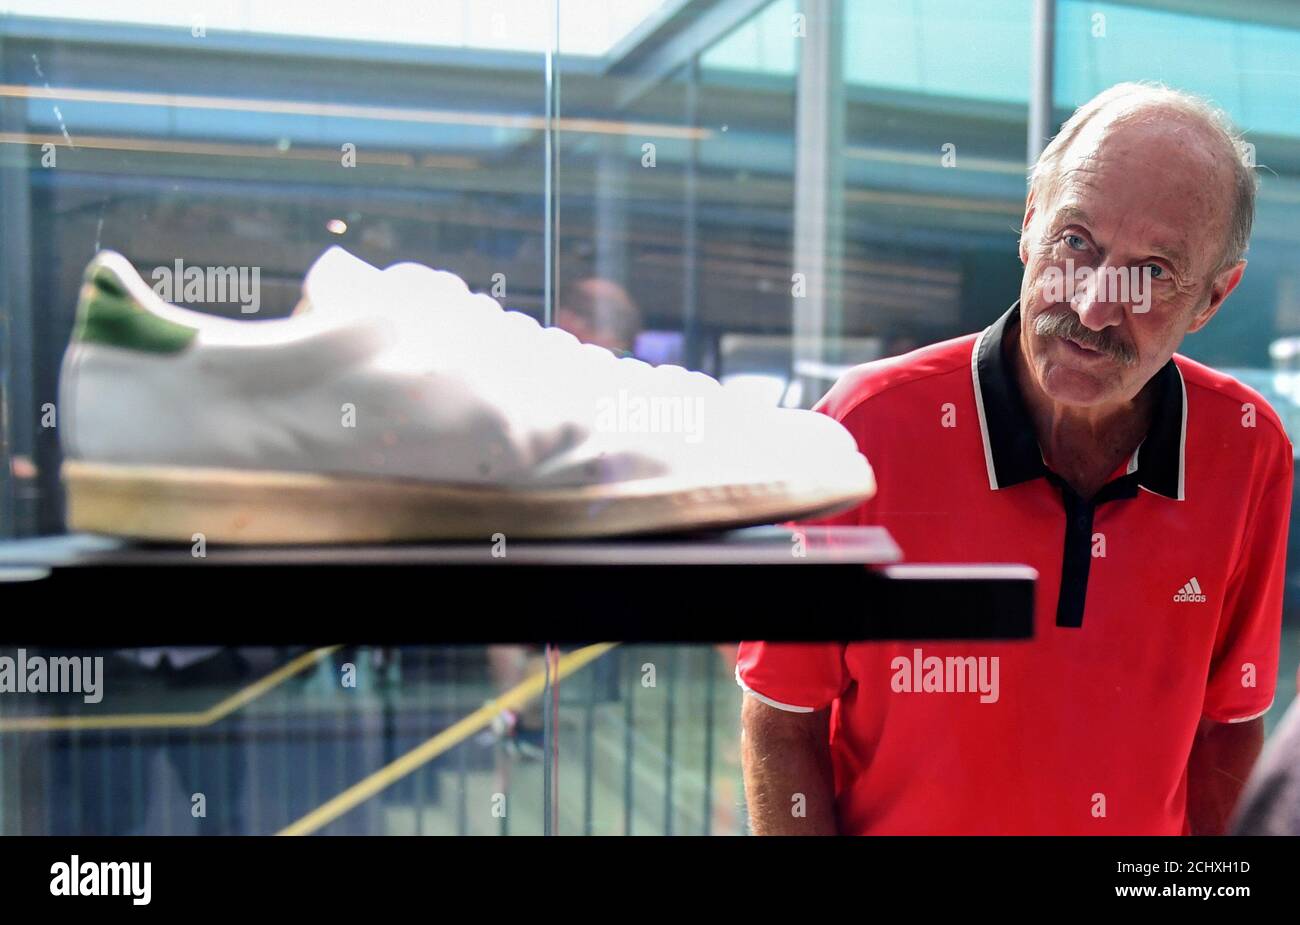 Former tennis player Stan Smith looks at his shoe as he attends the  celebrations for German sports apparel maker Adidas' 70th anniversary at  the company's history exhibition in Herzogenaurach, Germany, August 9,